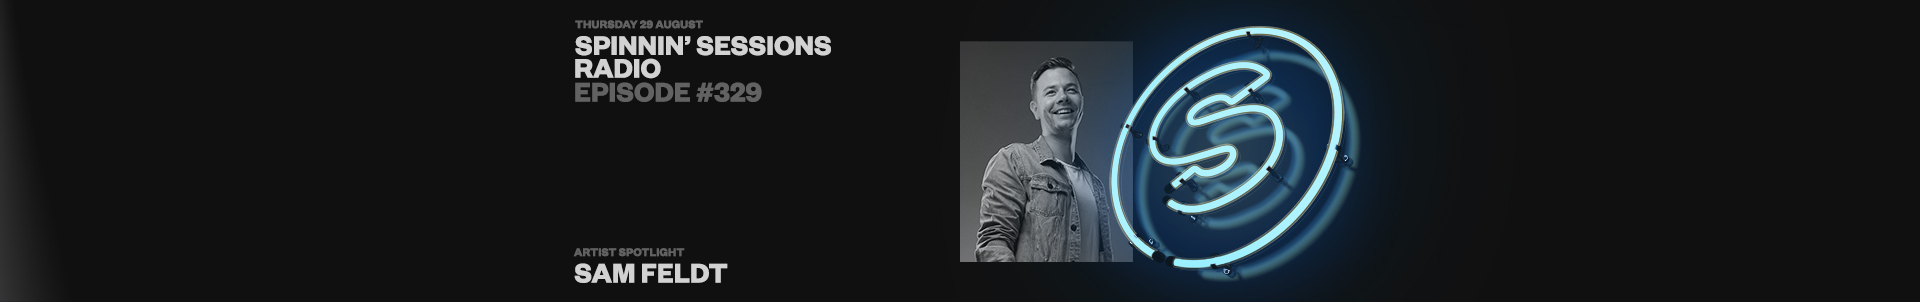 Listen to a brand new episode of Spinnin' Sessions radio